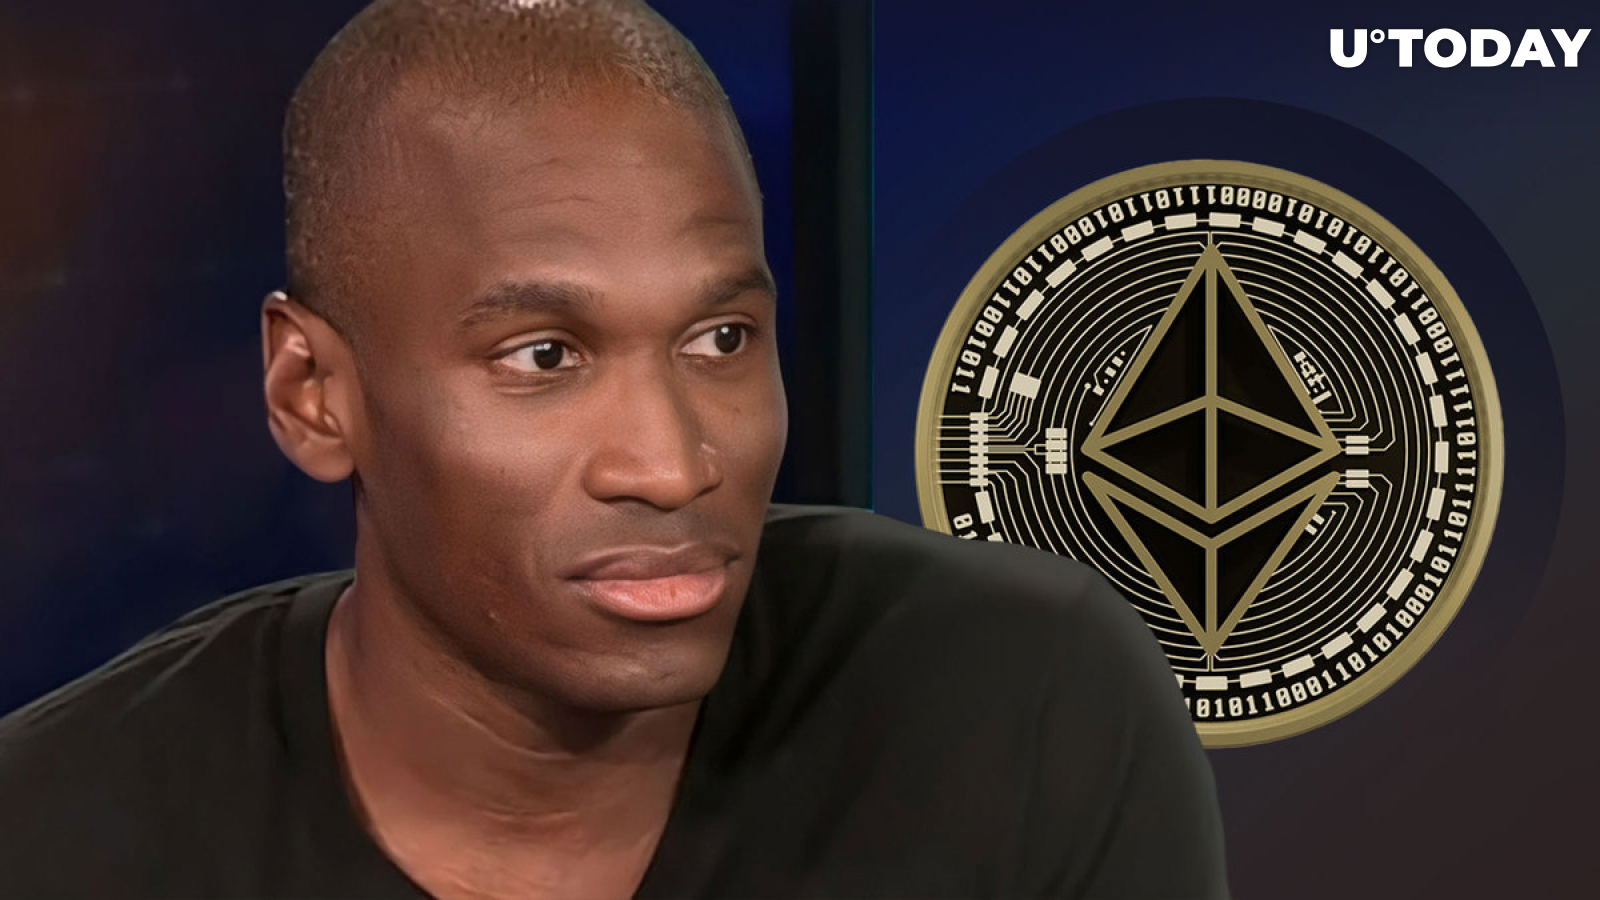 Ethereum (ETH) Price at $5,000 Predicted by BitMex Founder Arthur Hayes